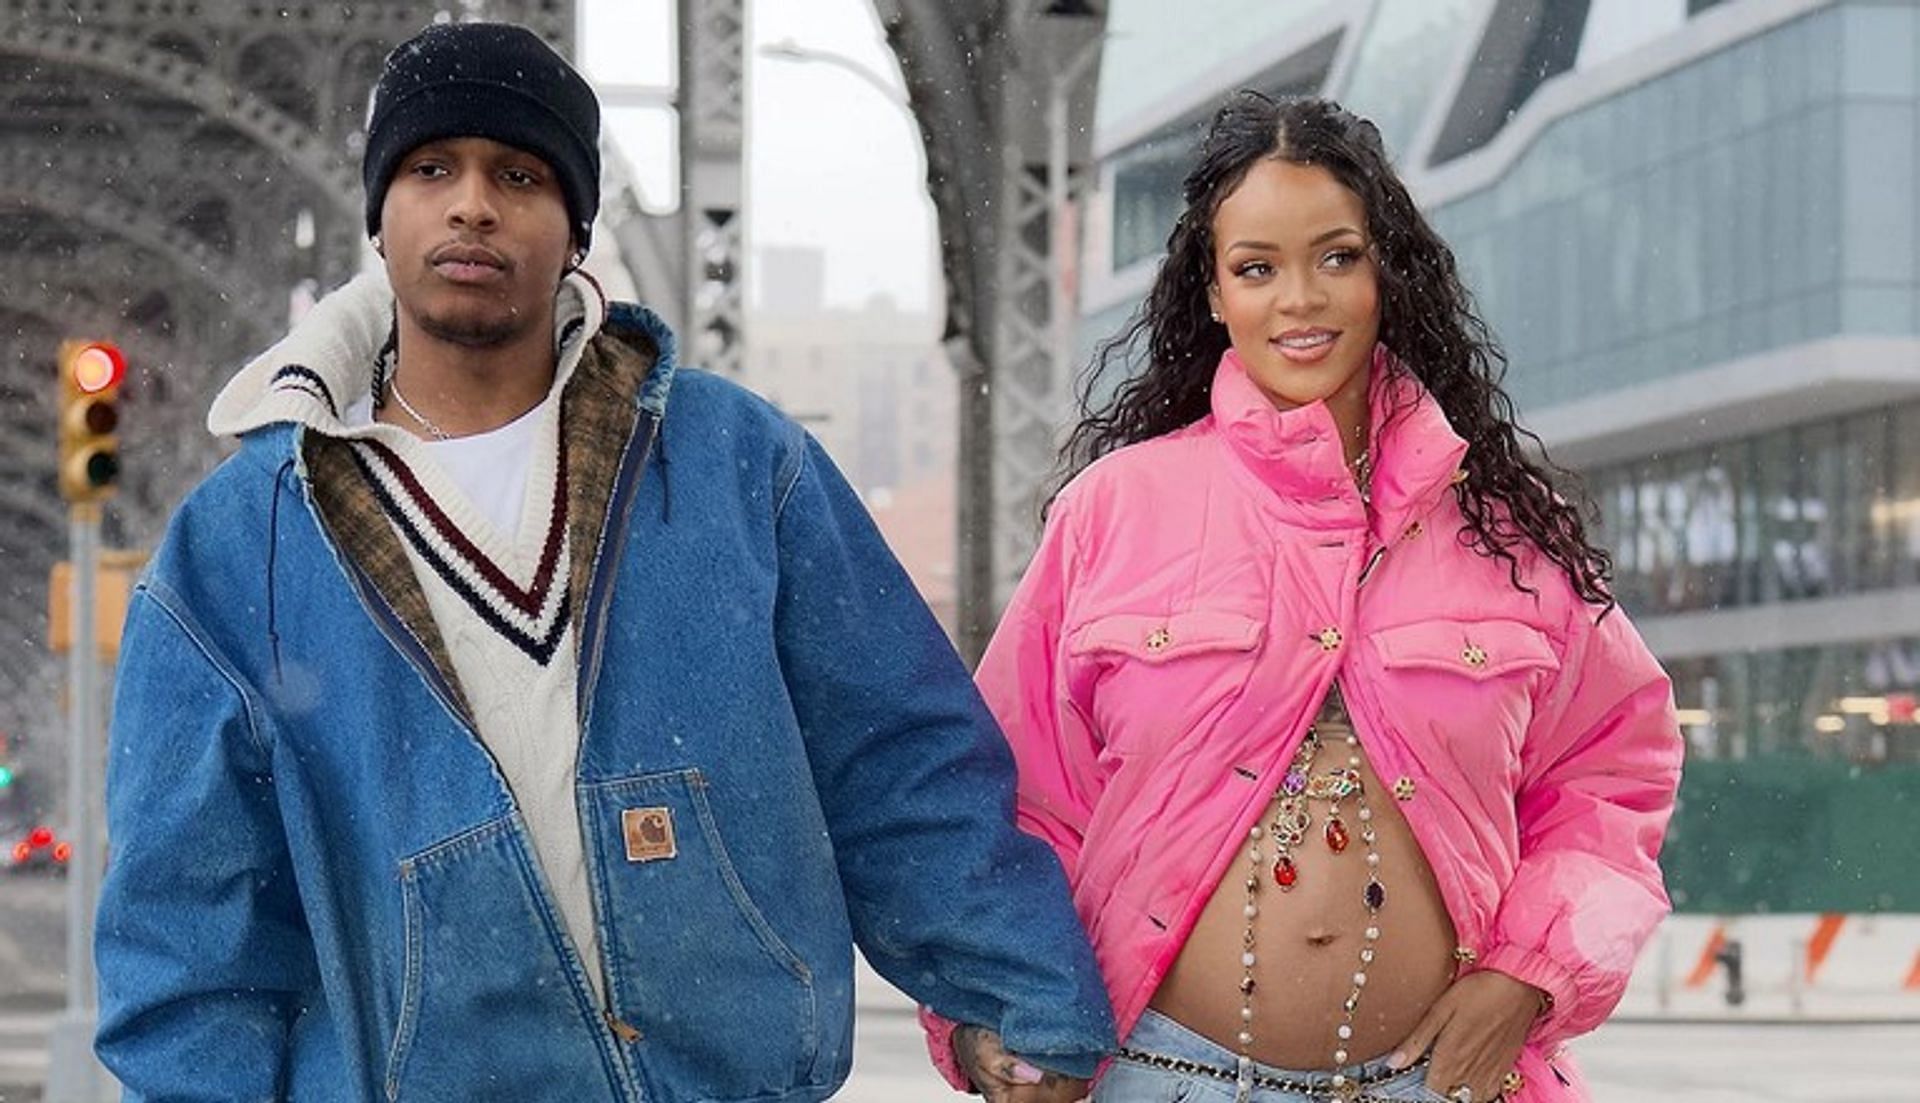 Rihanna welcomes her first child (Image via Shutterstock)